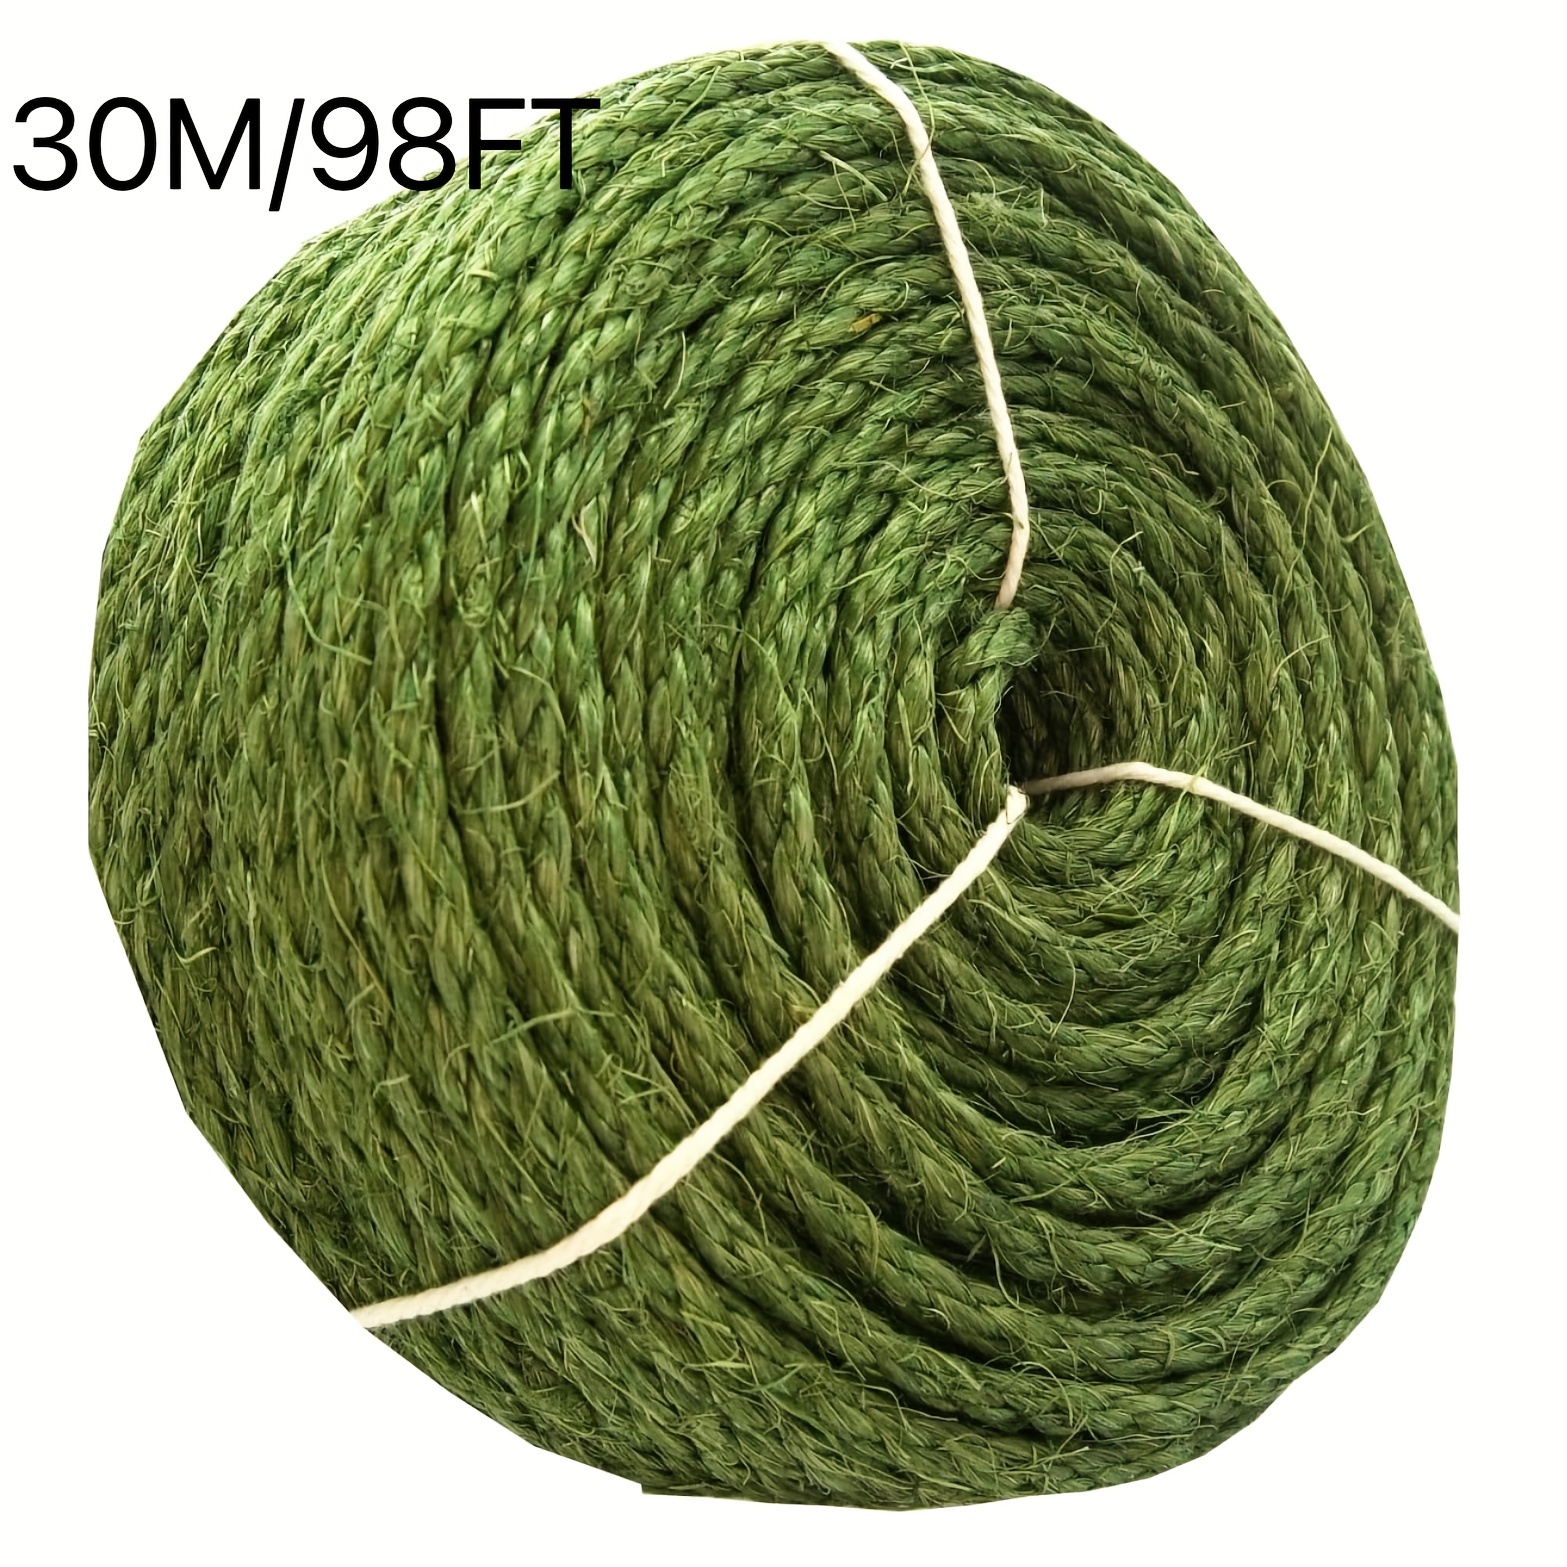  98 Feet 6mm Jute Thick Twine,Strong Hemp Rope,Natural